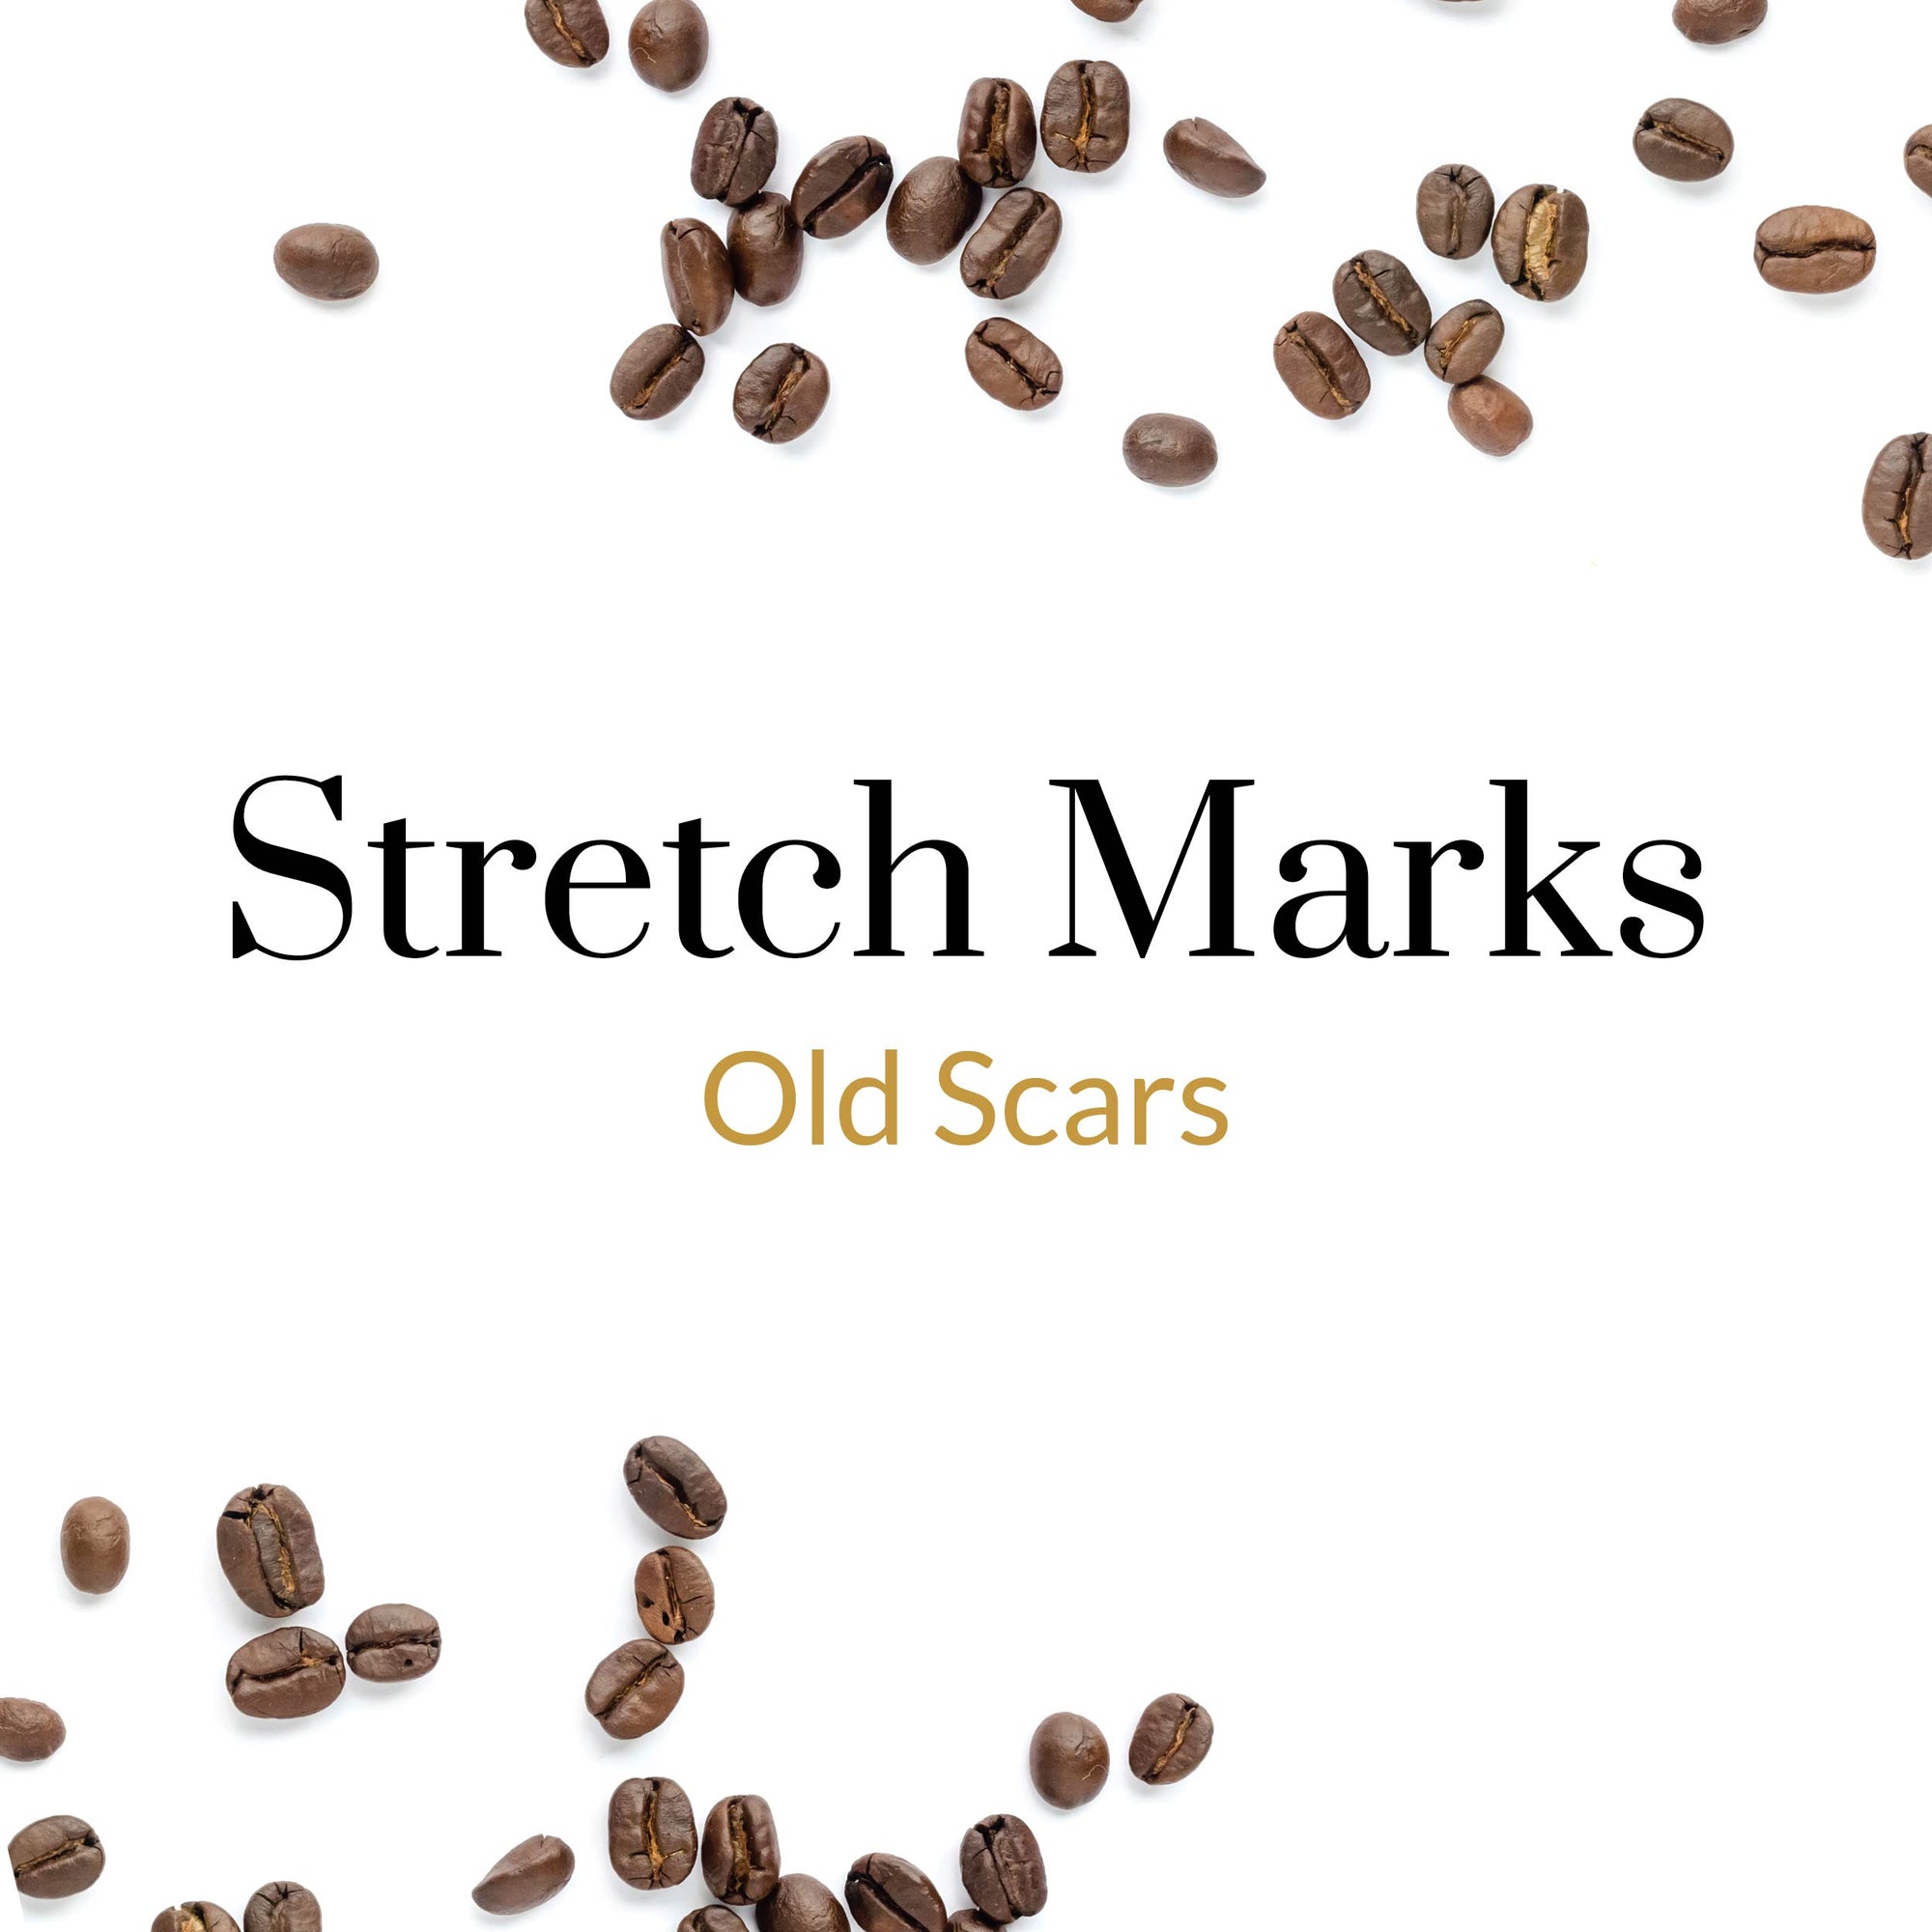 Old Scars - Stretch Marks